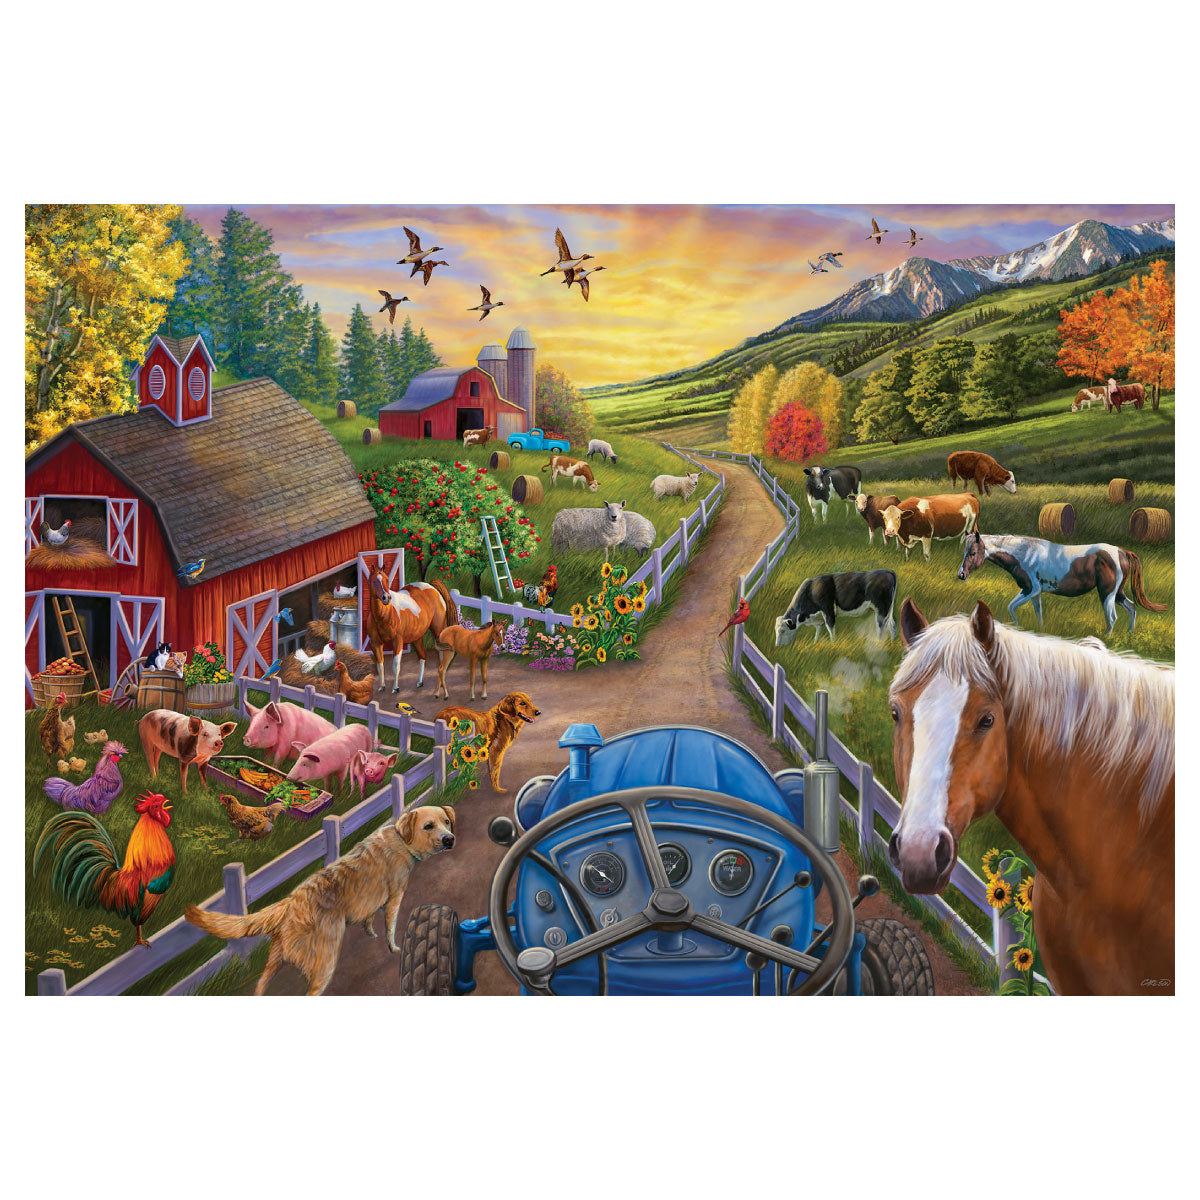 My First Farm 24 pc Floor Puzzle from Ravensburger